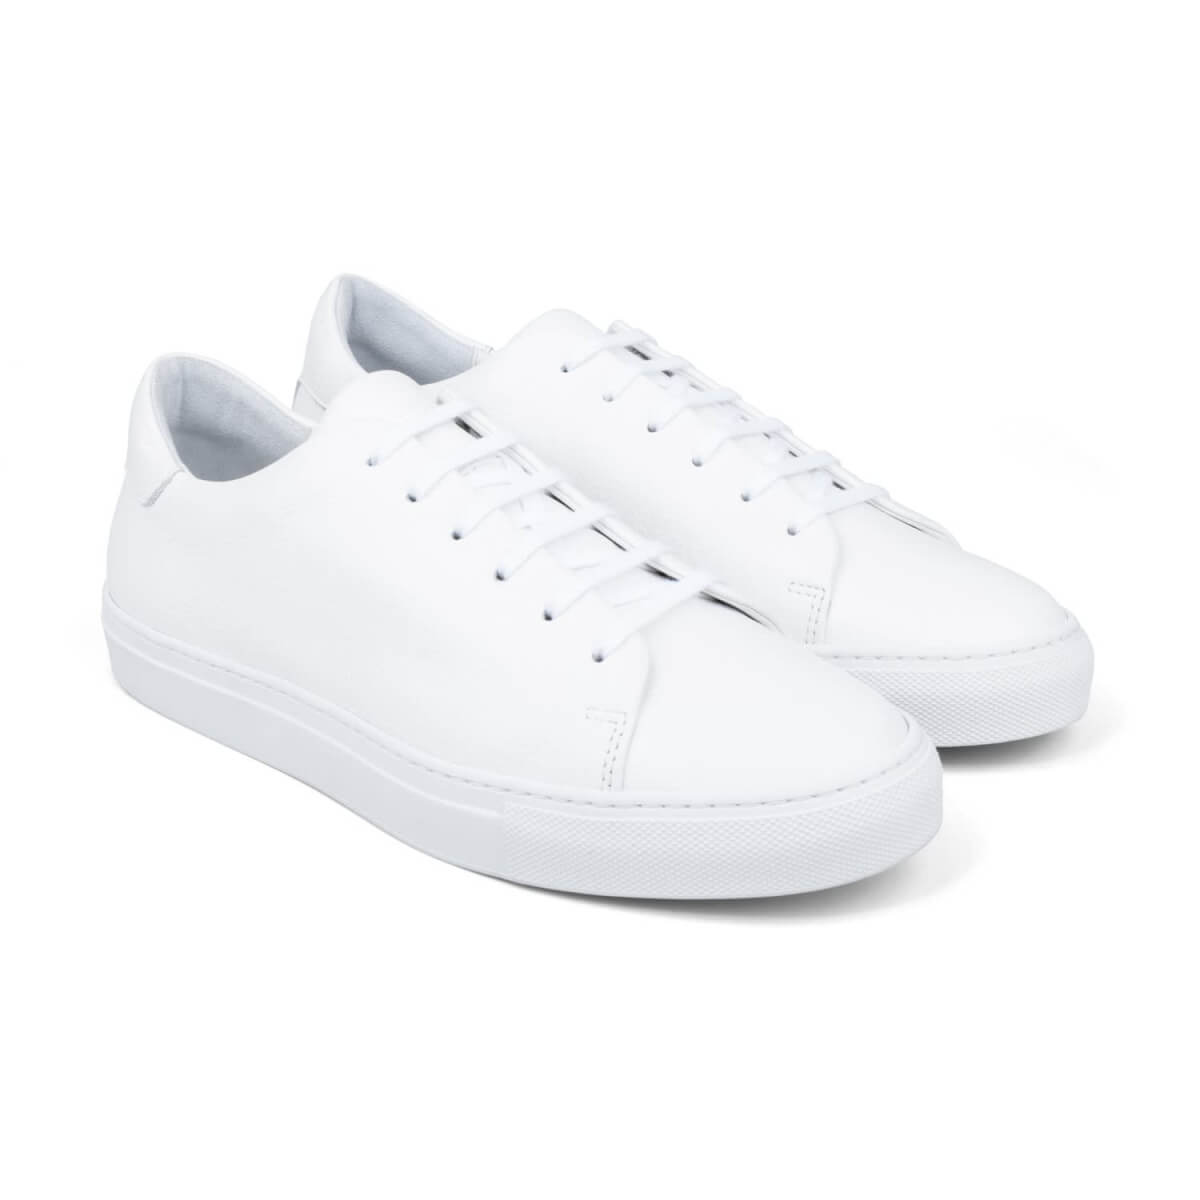 White low top leather sneaker